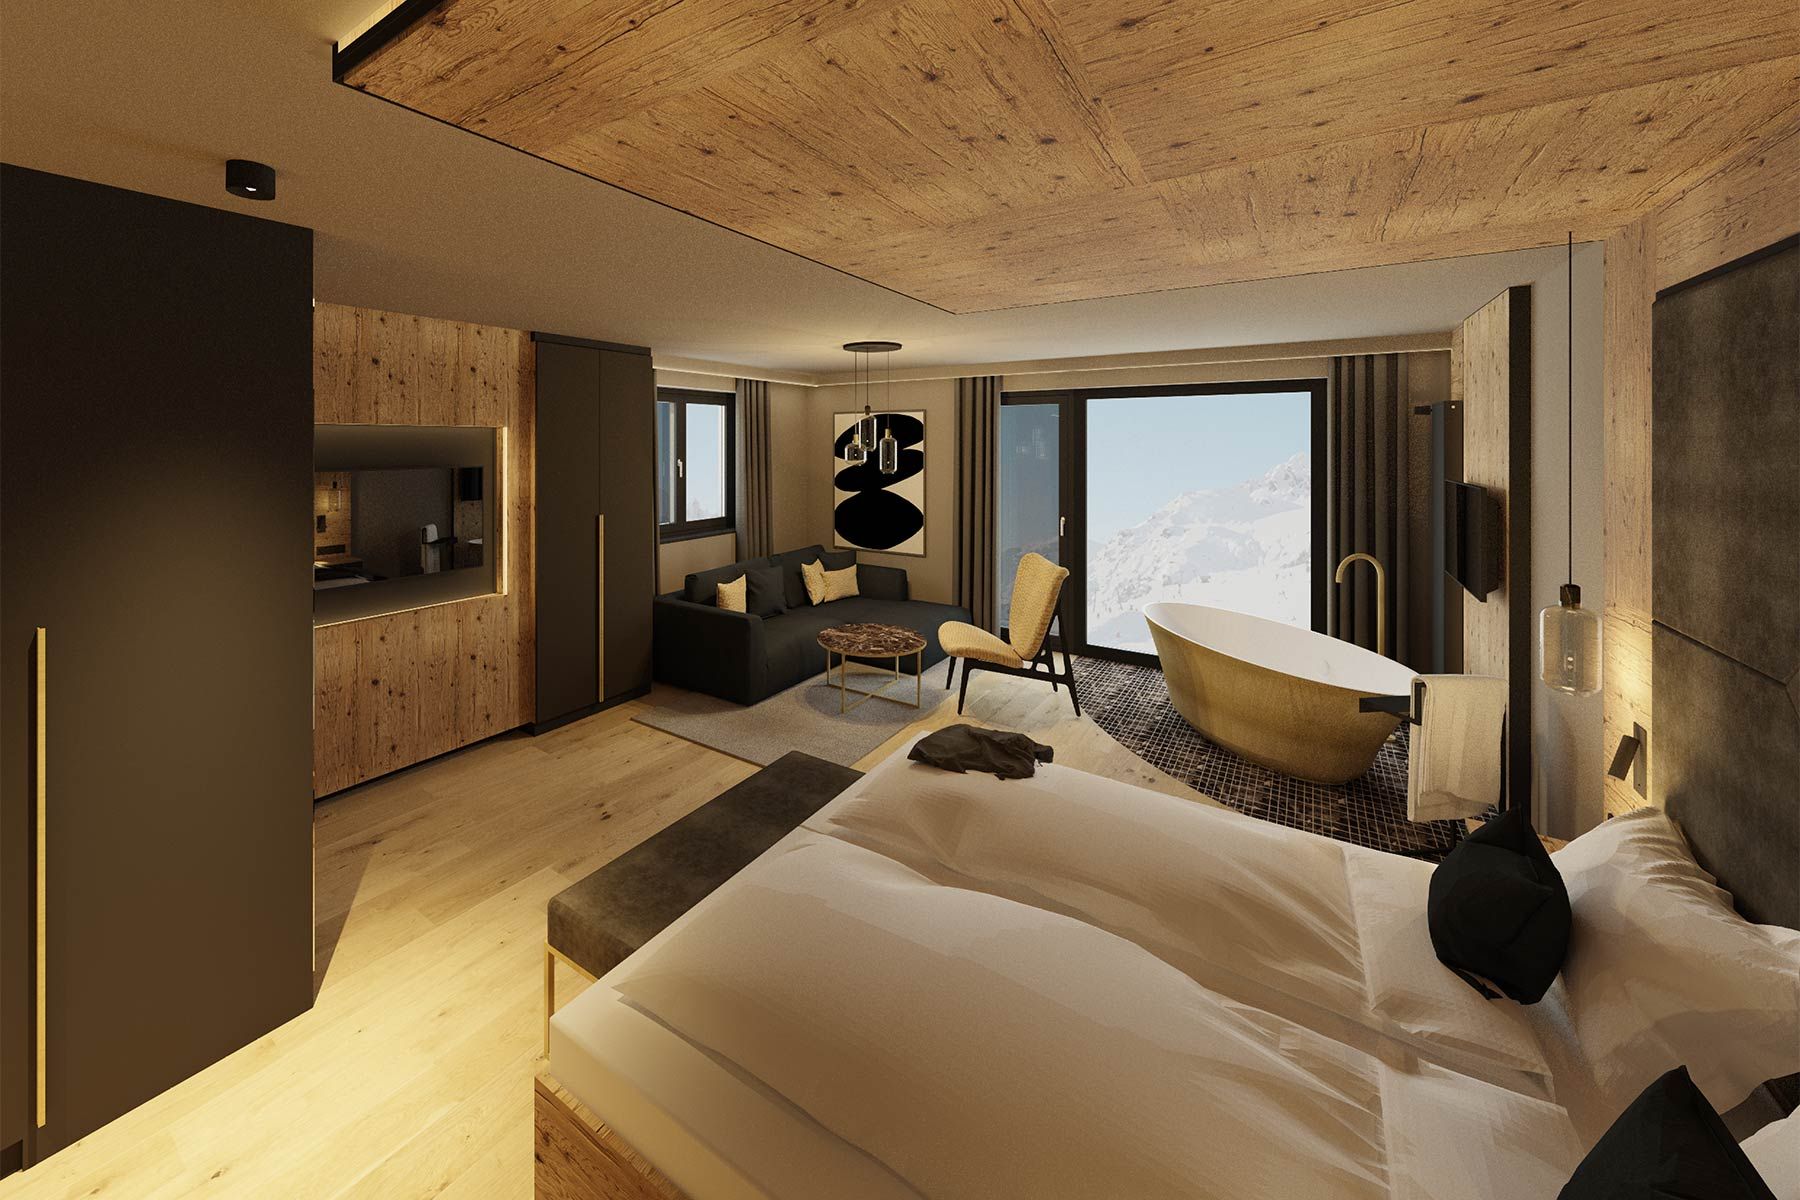 Suite Waldgeflüster with kitchenette, lounge and view of the ski piste